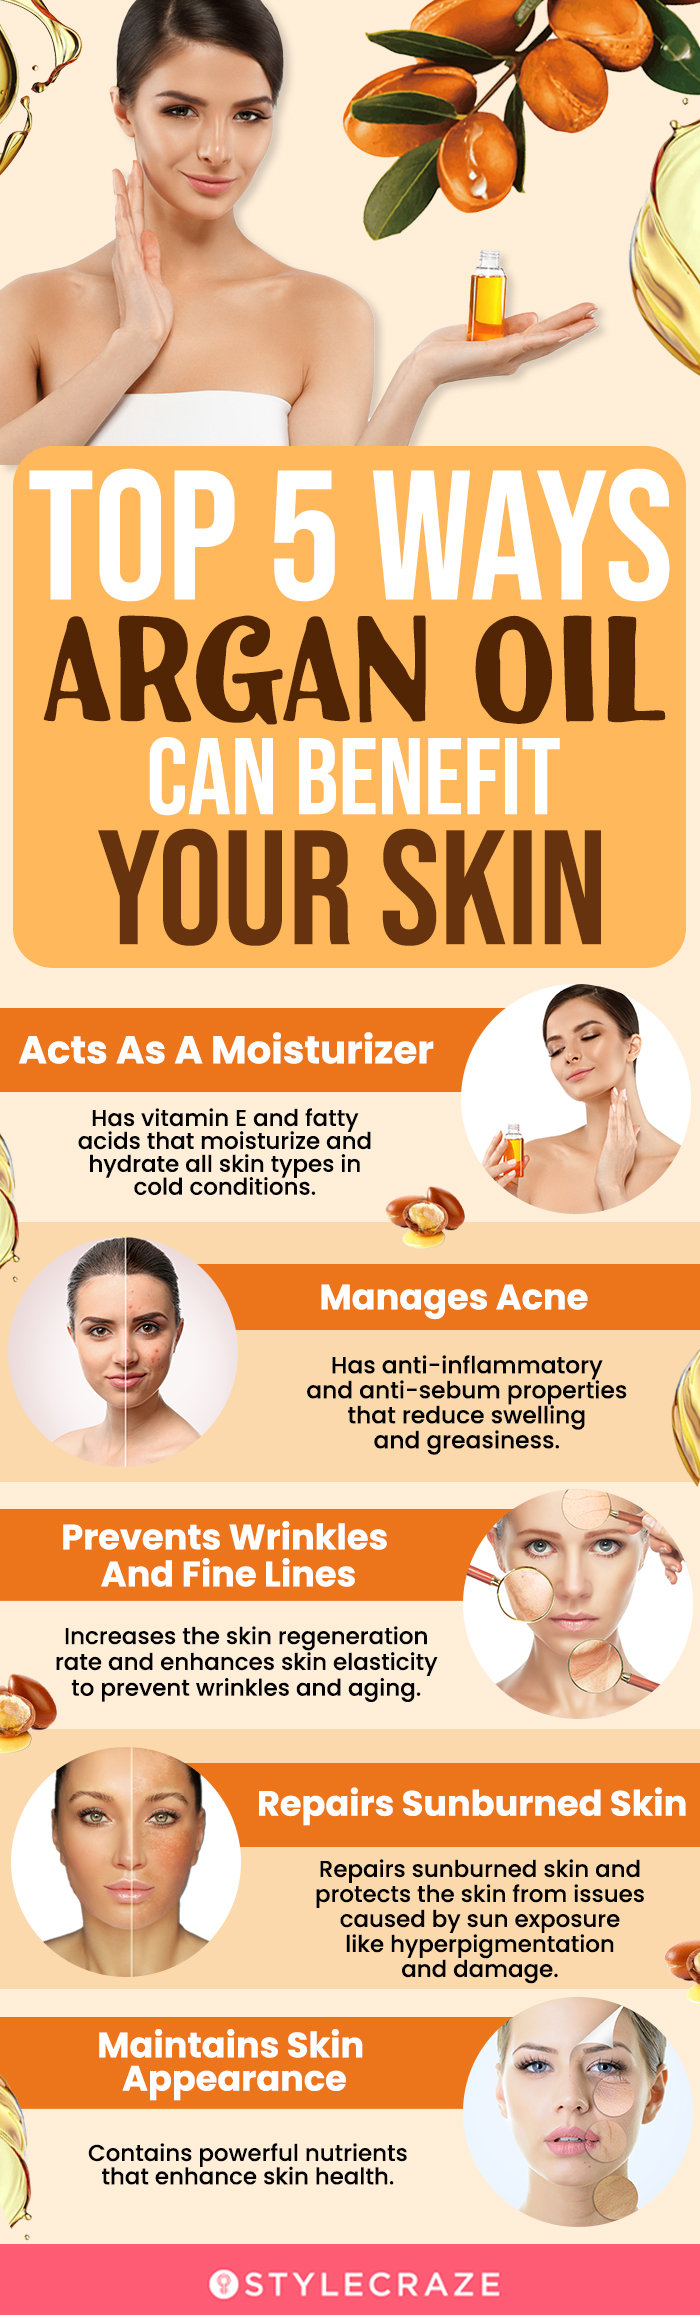 top 5 ways argan oil can benefit your skin (infographic)